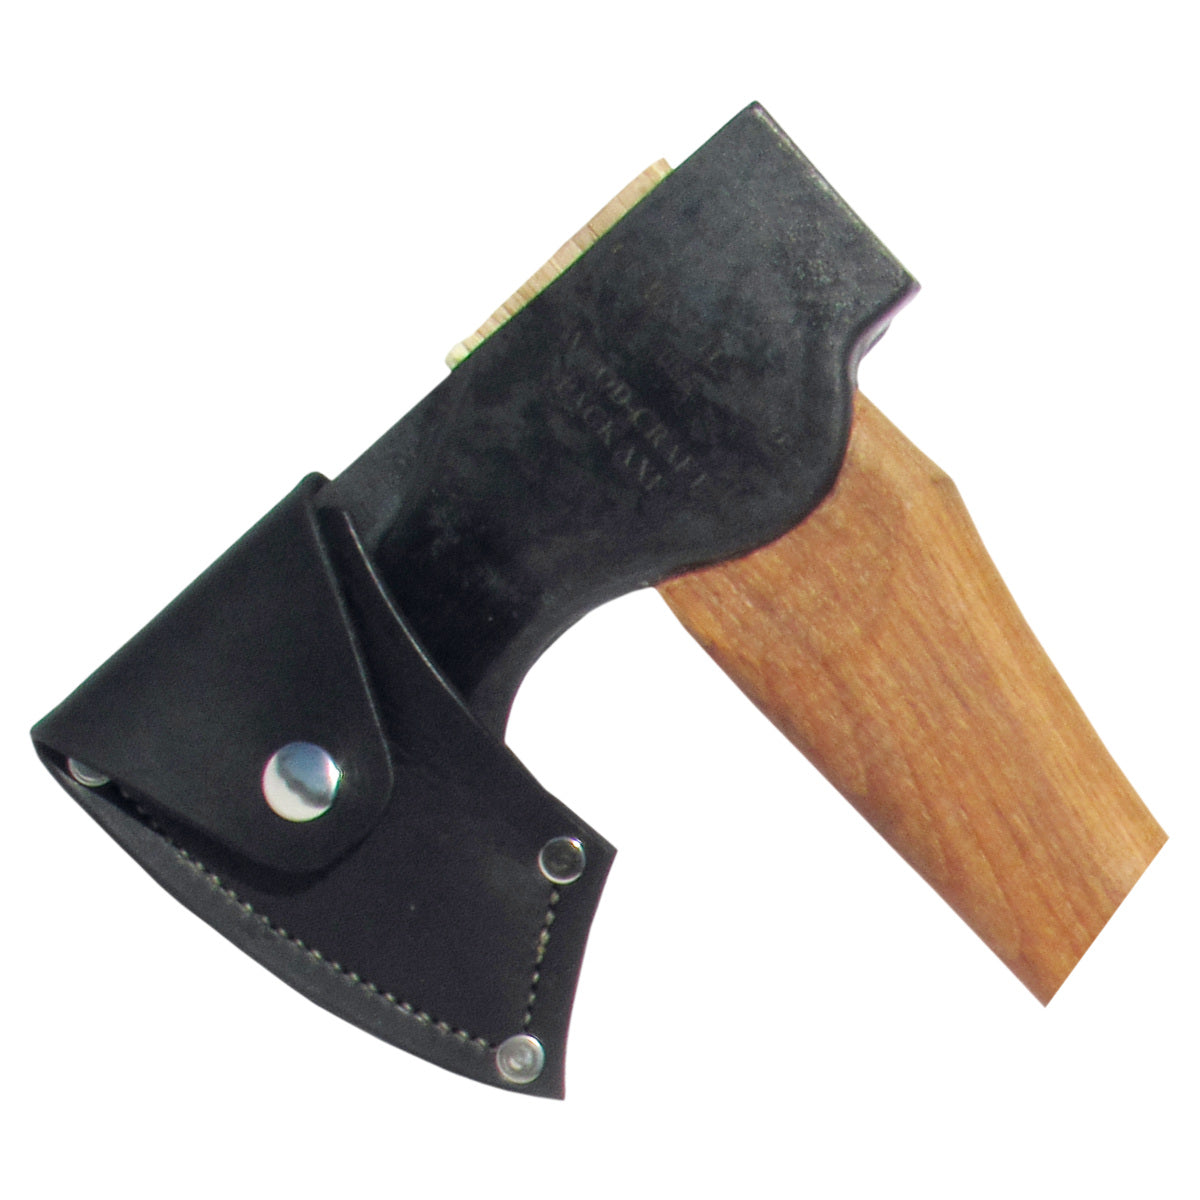 Council Tool Wood-Craft Pack Axe 24″ Curved Handle